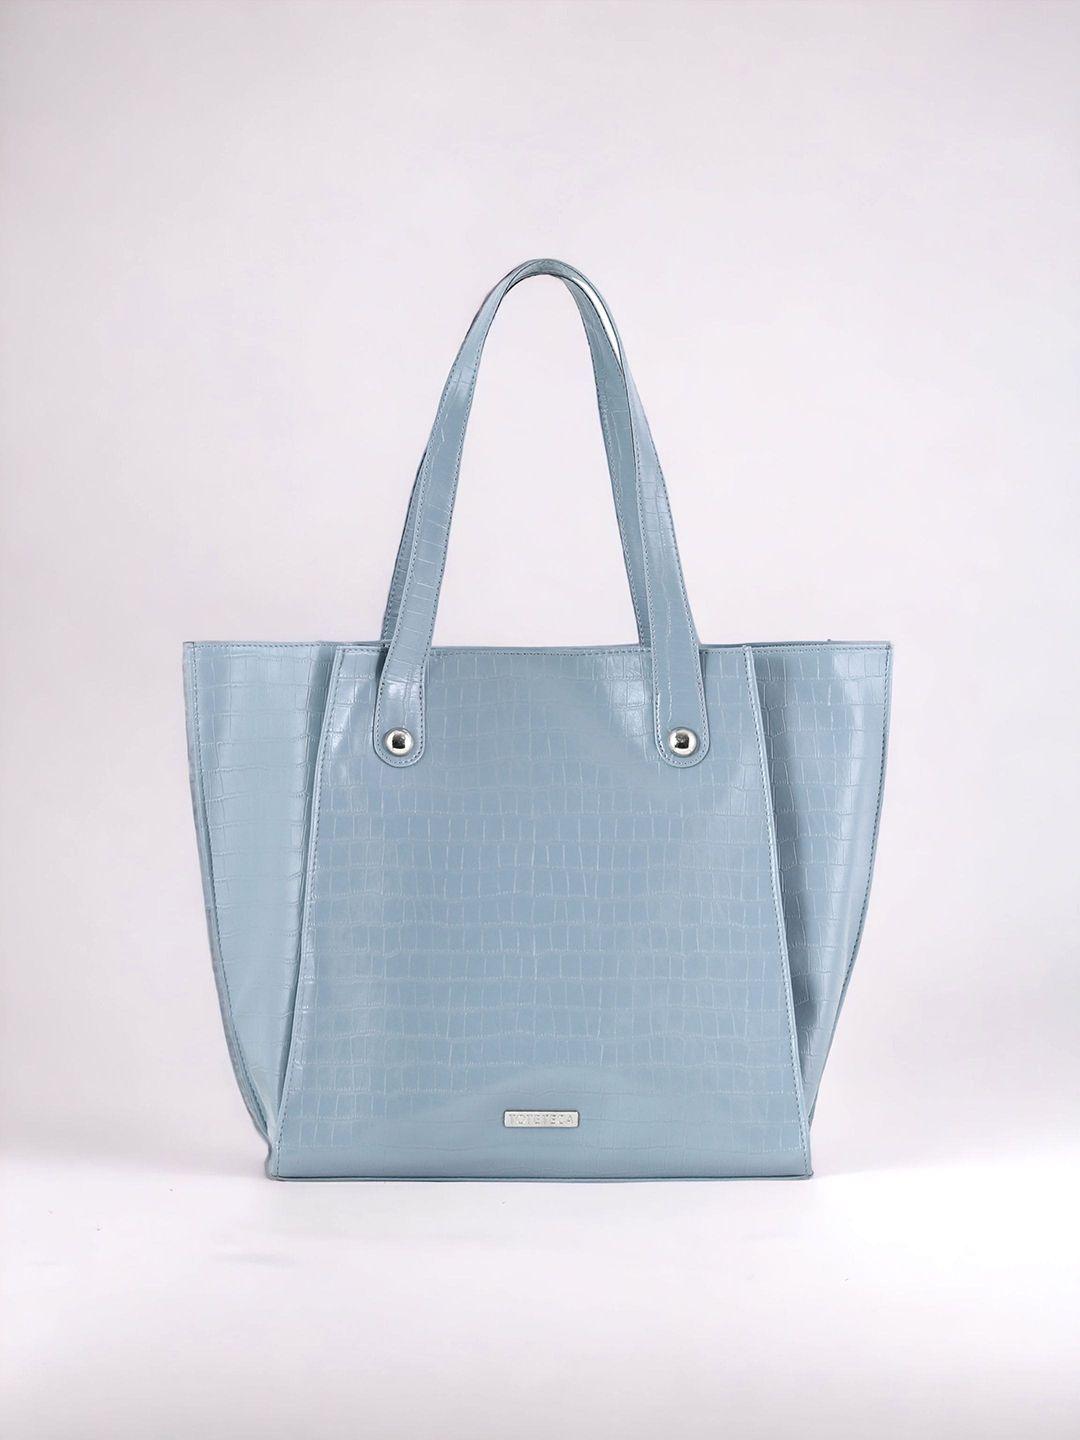 toteteca textured oversized shopper tote bag with tasselled